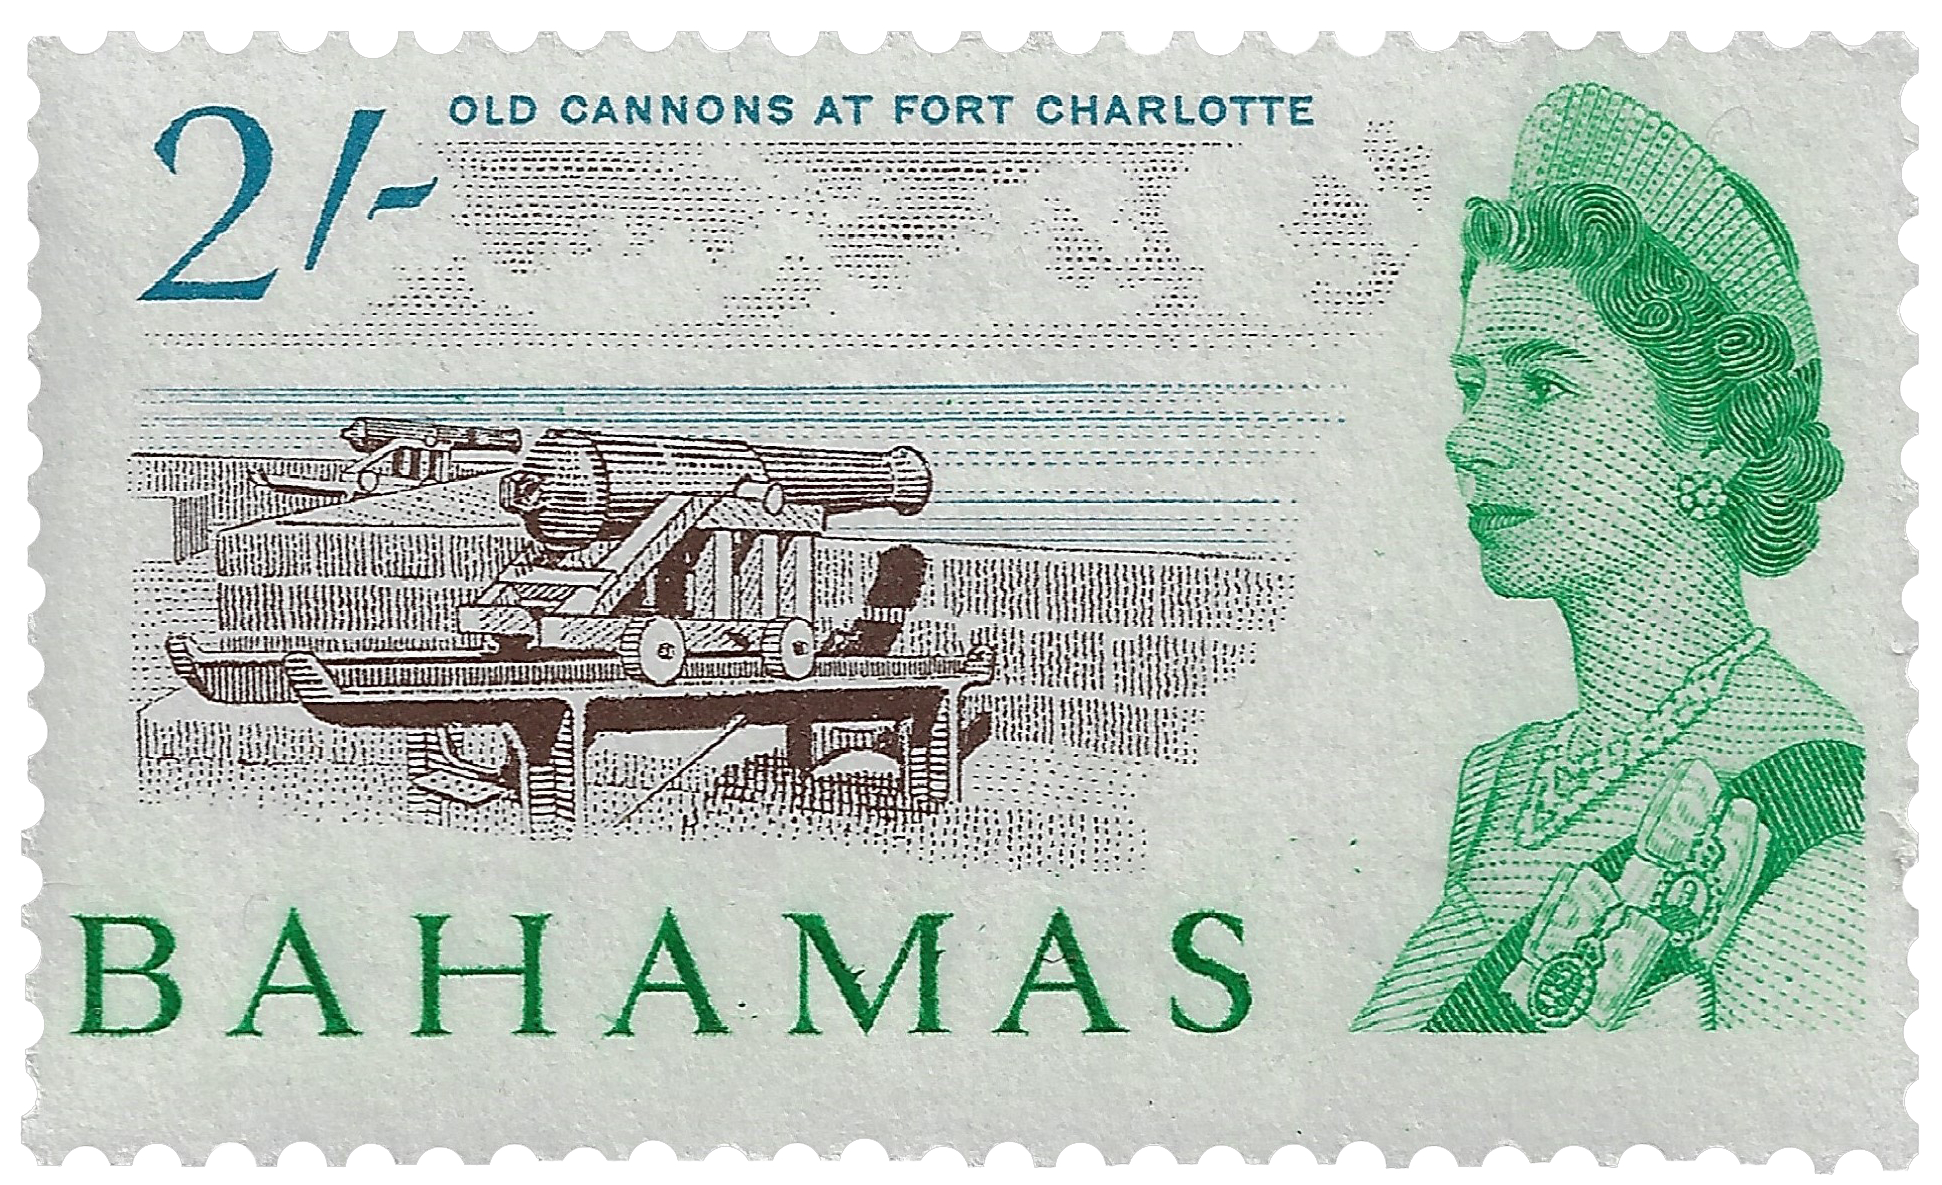 2s 1965, Old Cannons at Fort Charlotte